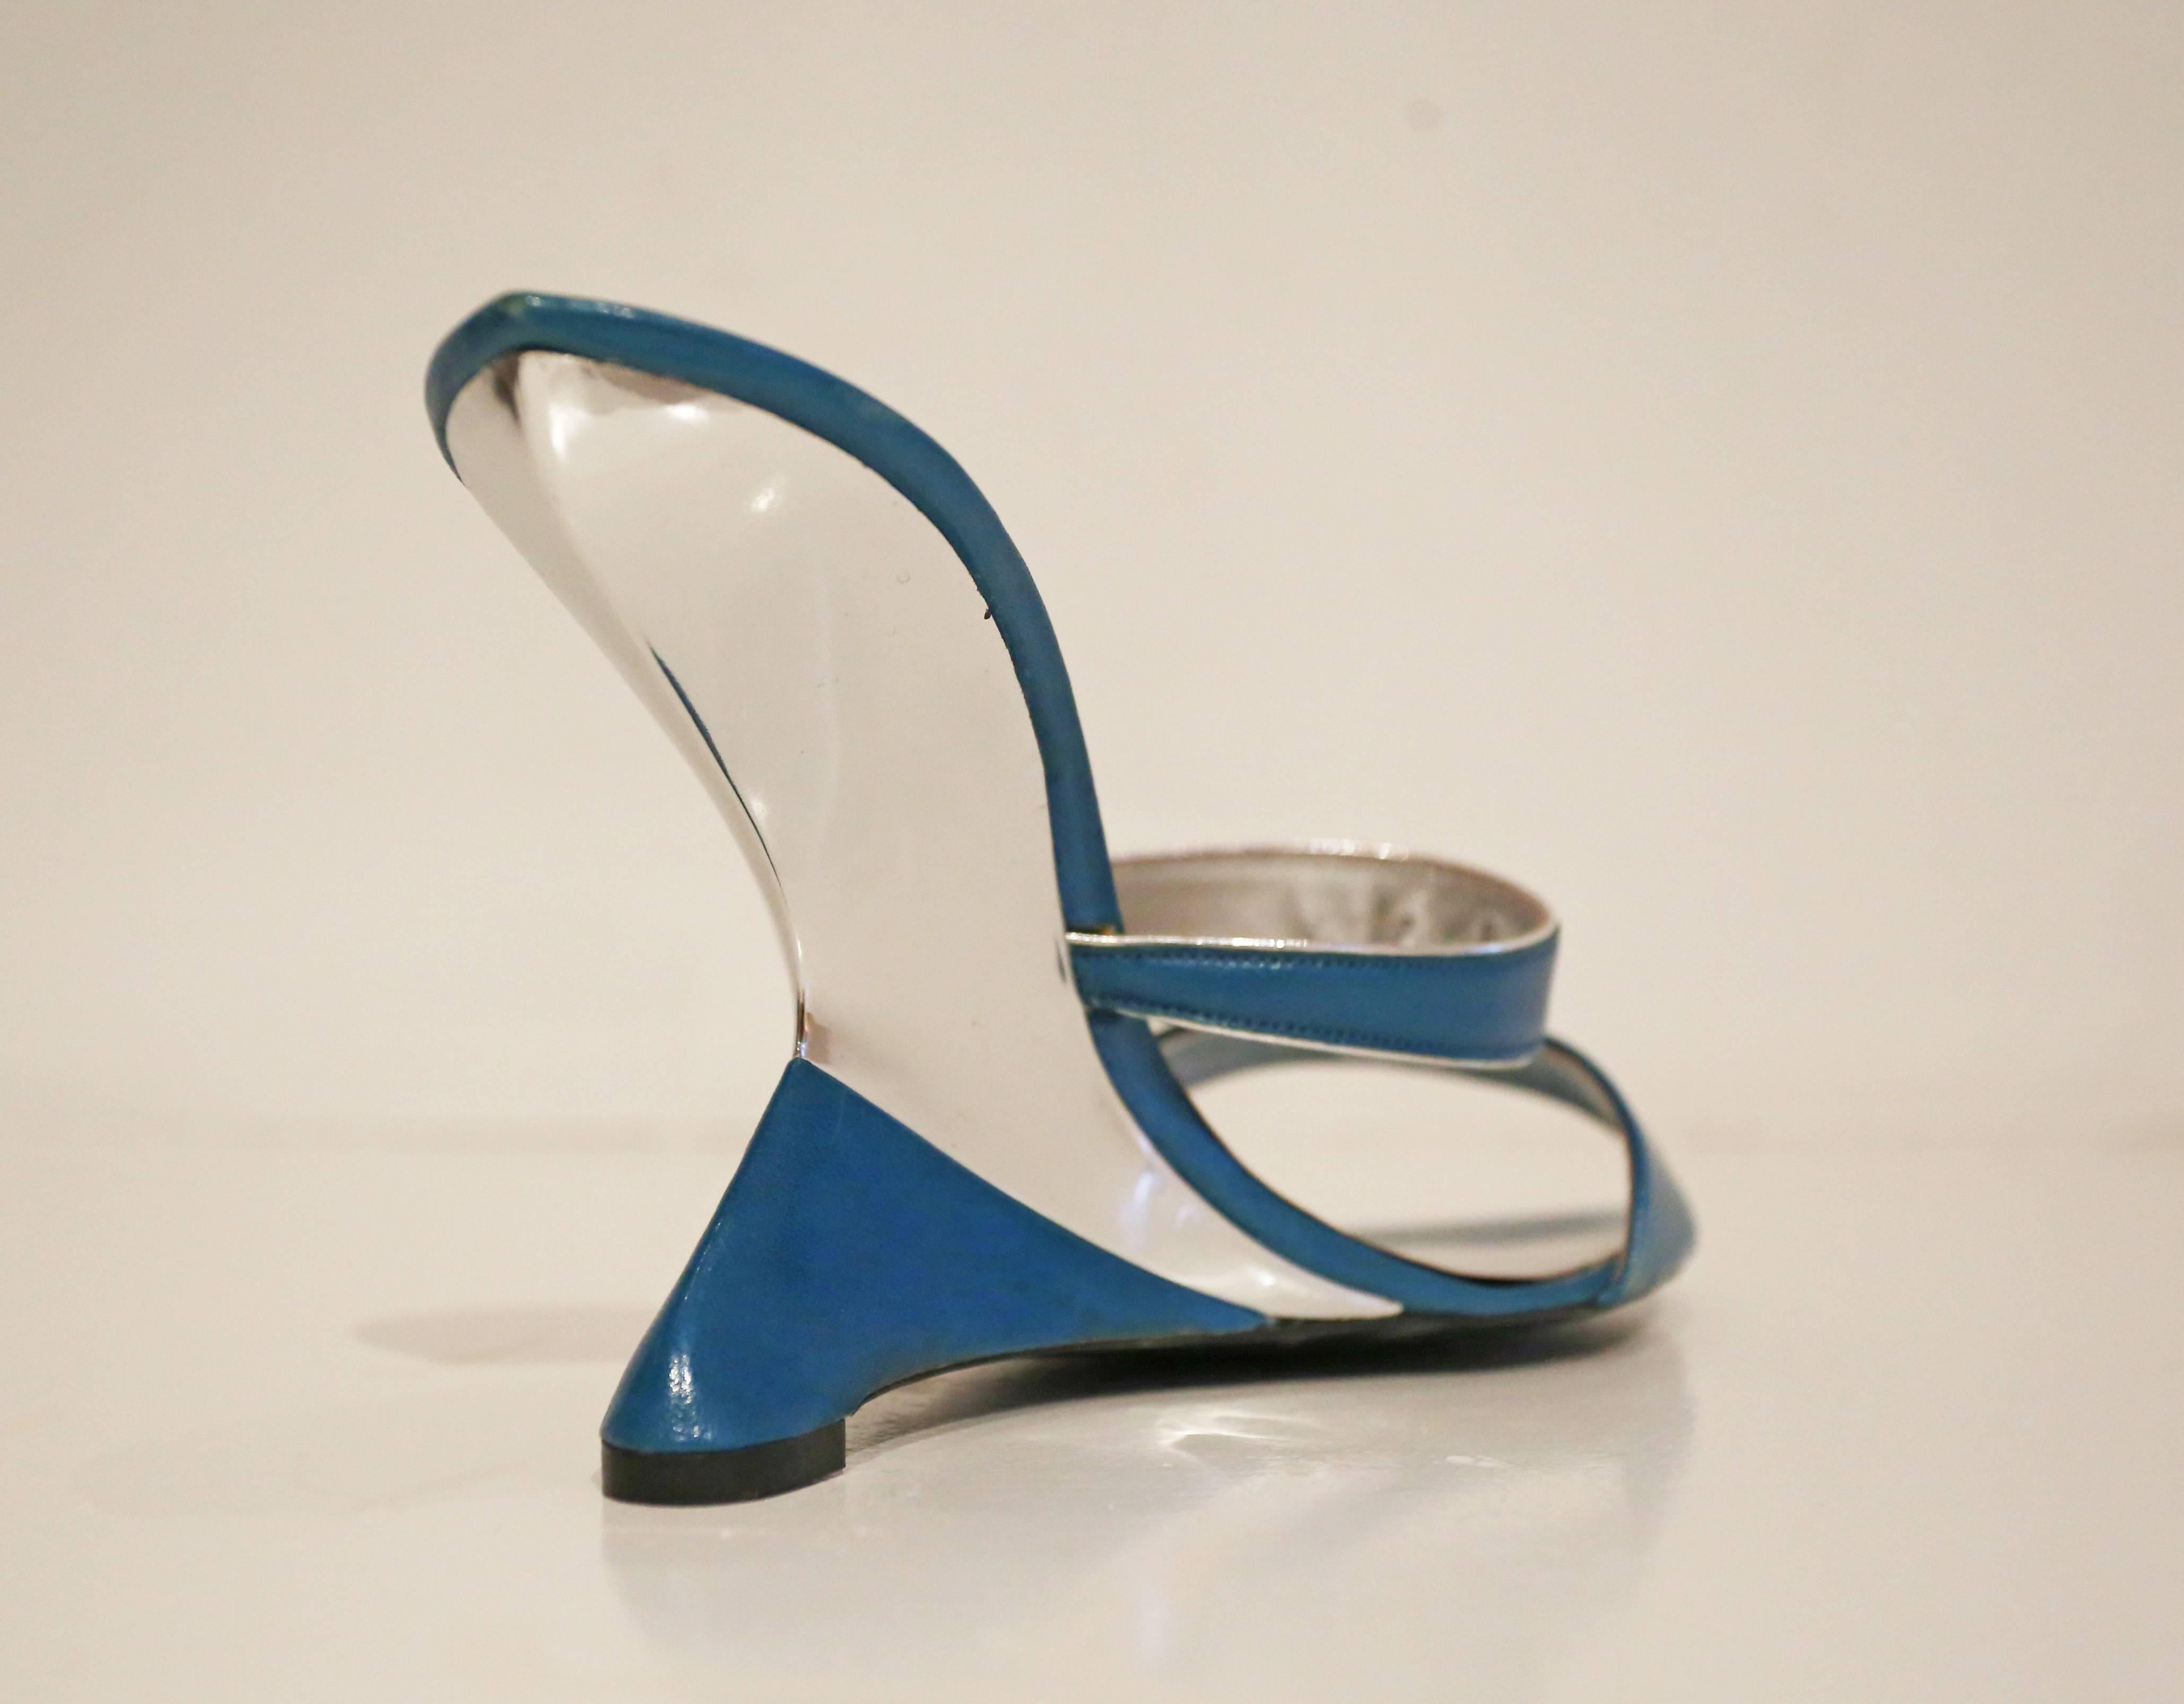 A pair of incredibly rare  Charles Jourdan wedge sandals, circa 1969–70. The shoes are in a turquoise and metallic silver leather and feature an avant-garde inwards wedge heel. These shoes are definitely ahead of their time!

Size 39 

Comes